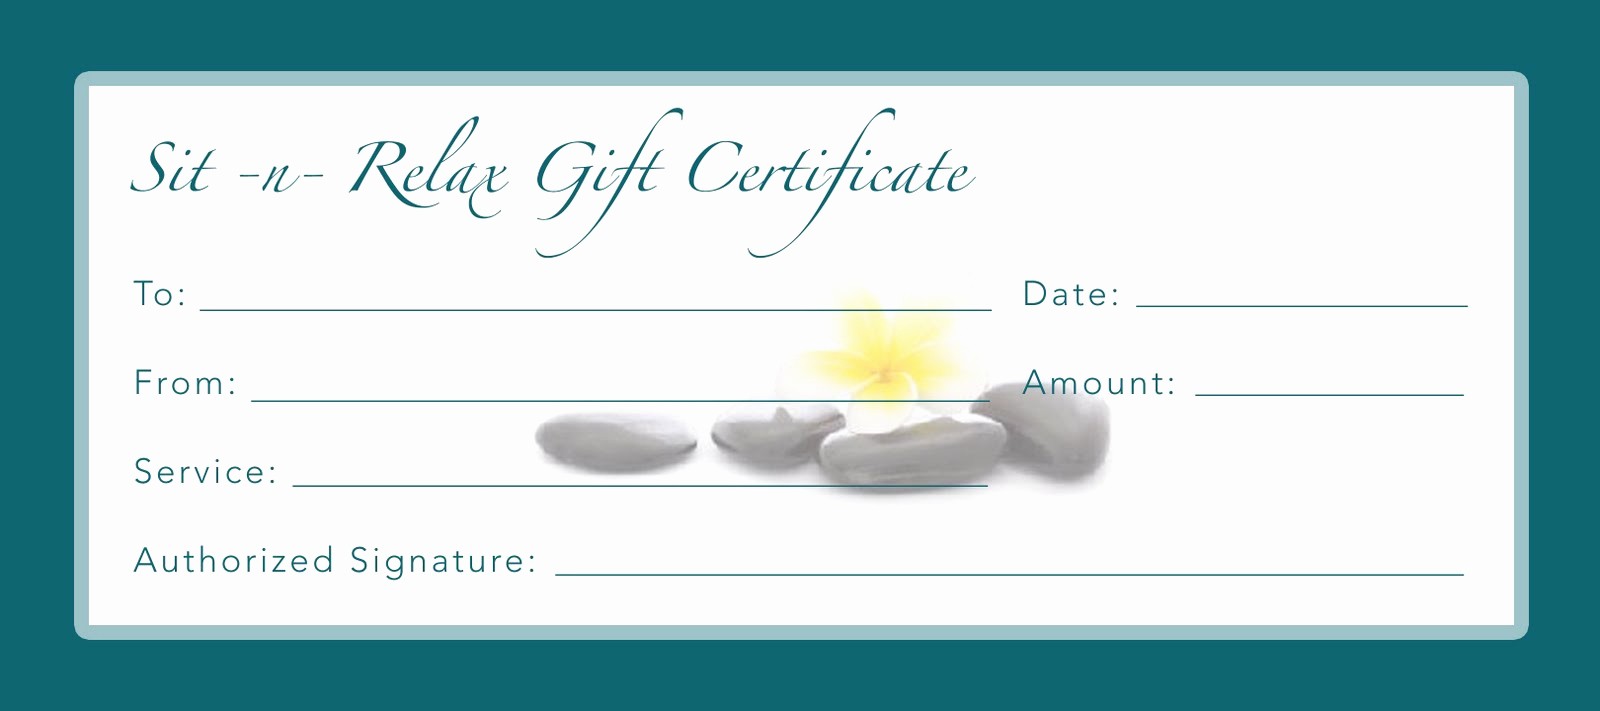 Spa Gift Certificates Templates Free Lovely Blank Spa Gift Certificate Template